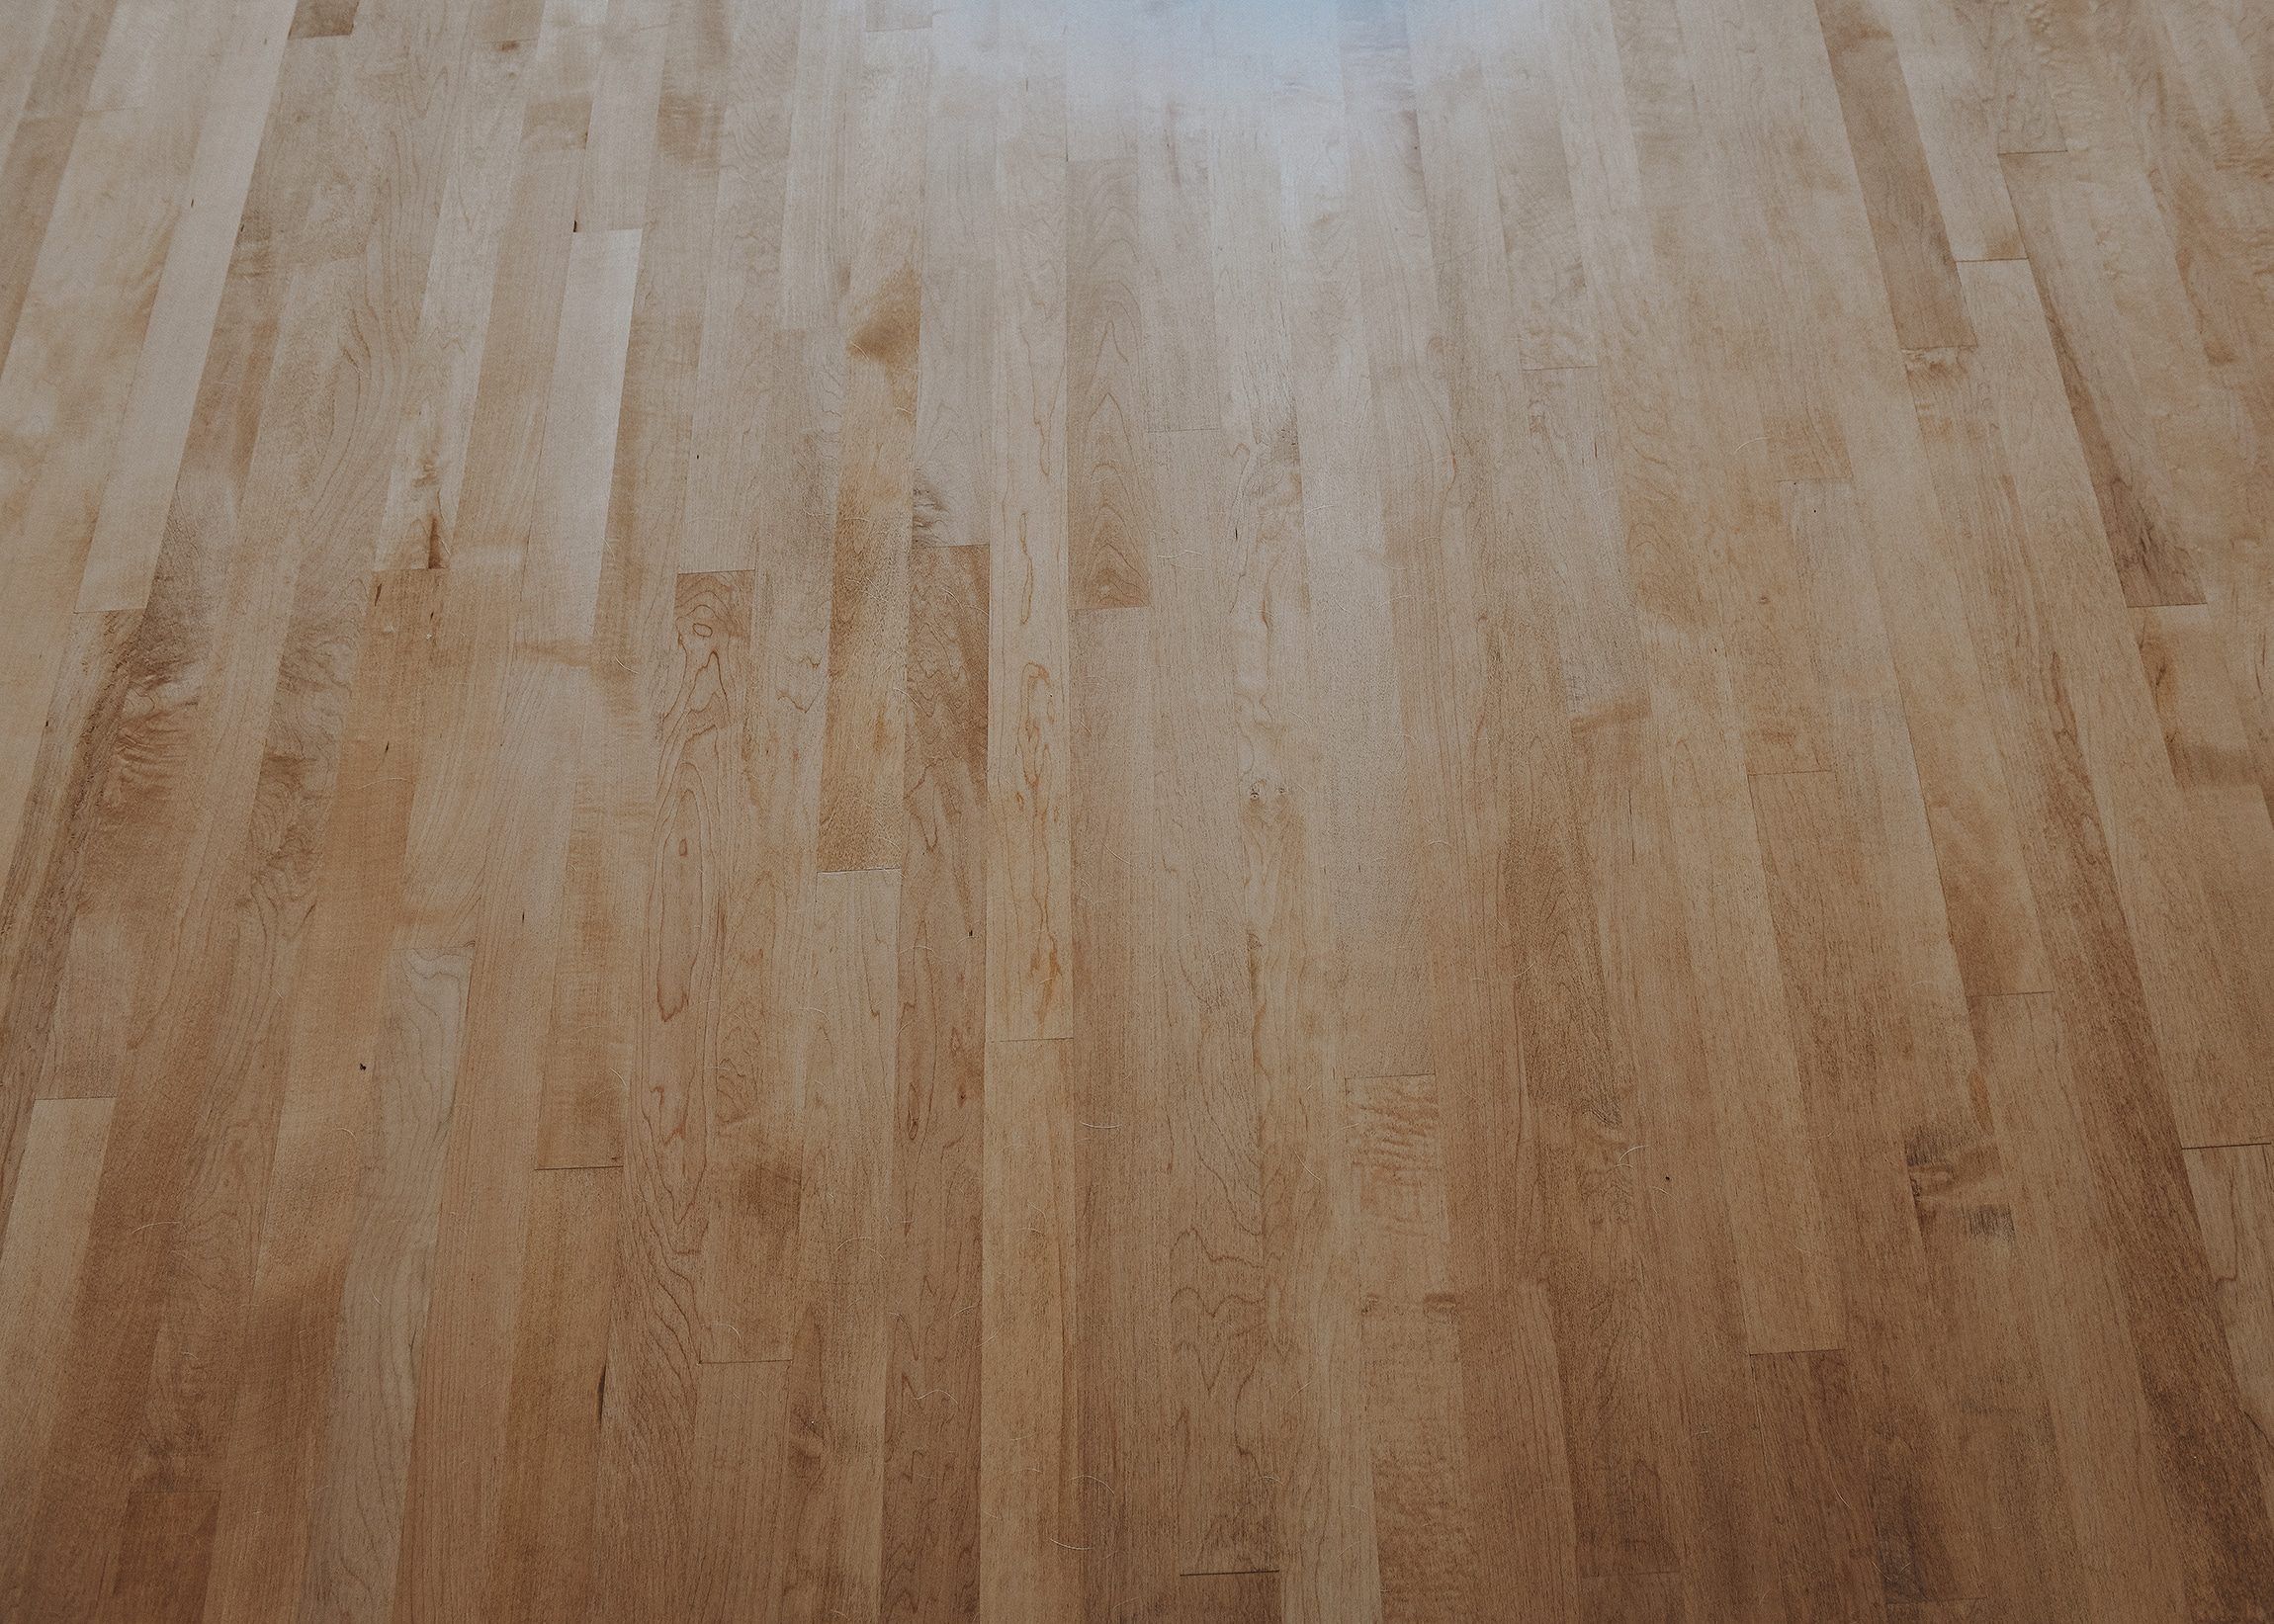 Maple flooring installed in our kitchen renomvation. 50/50 Minwax Ipswich Pine and DuraSeal Fruitwood stain | via Yellow Brick Home